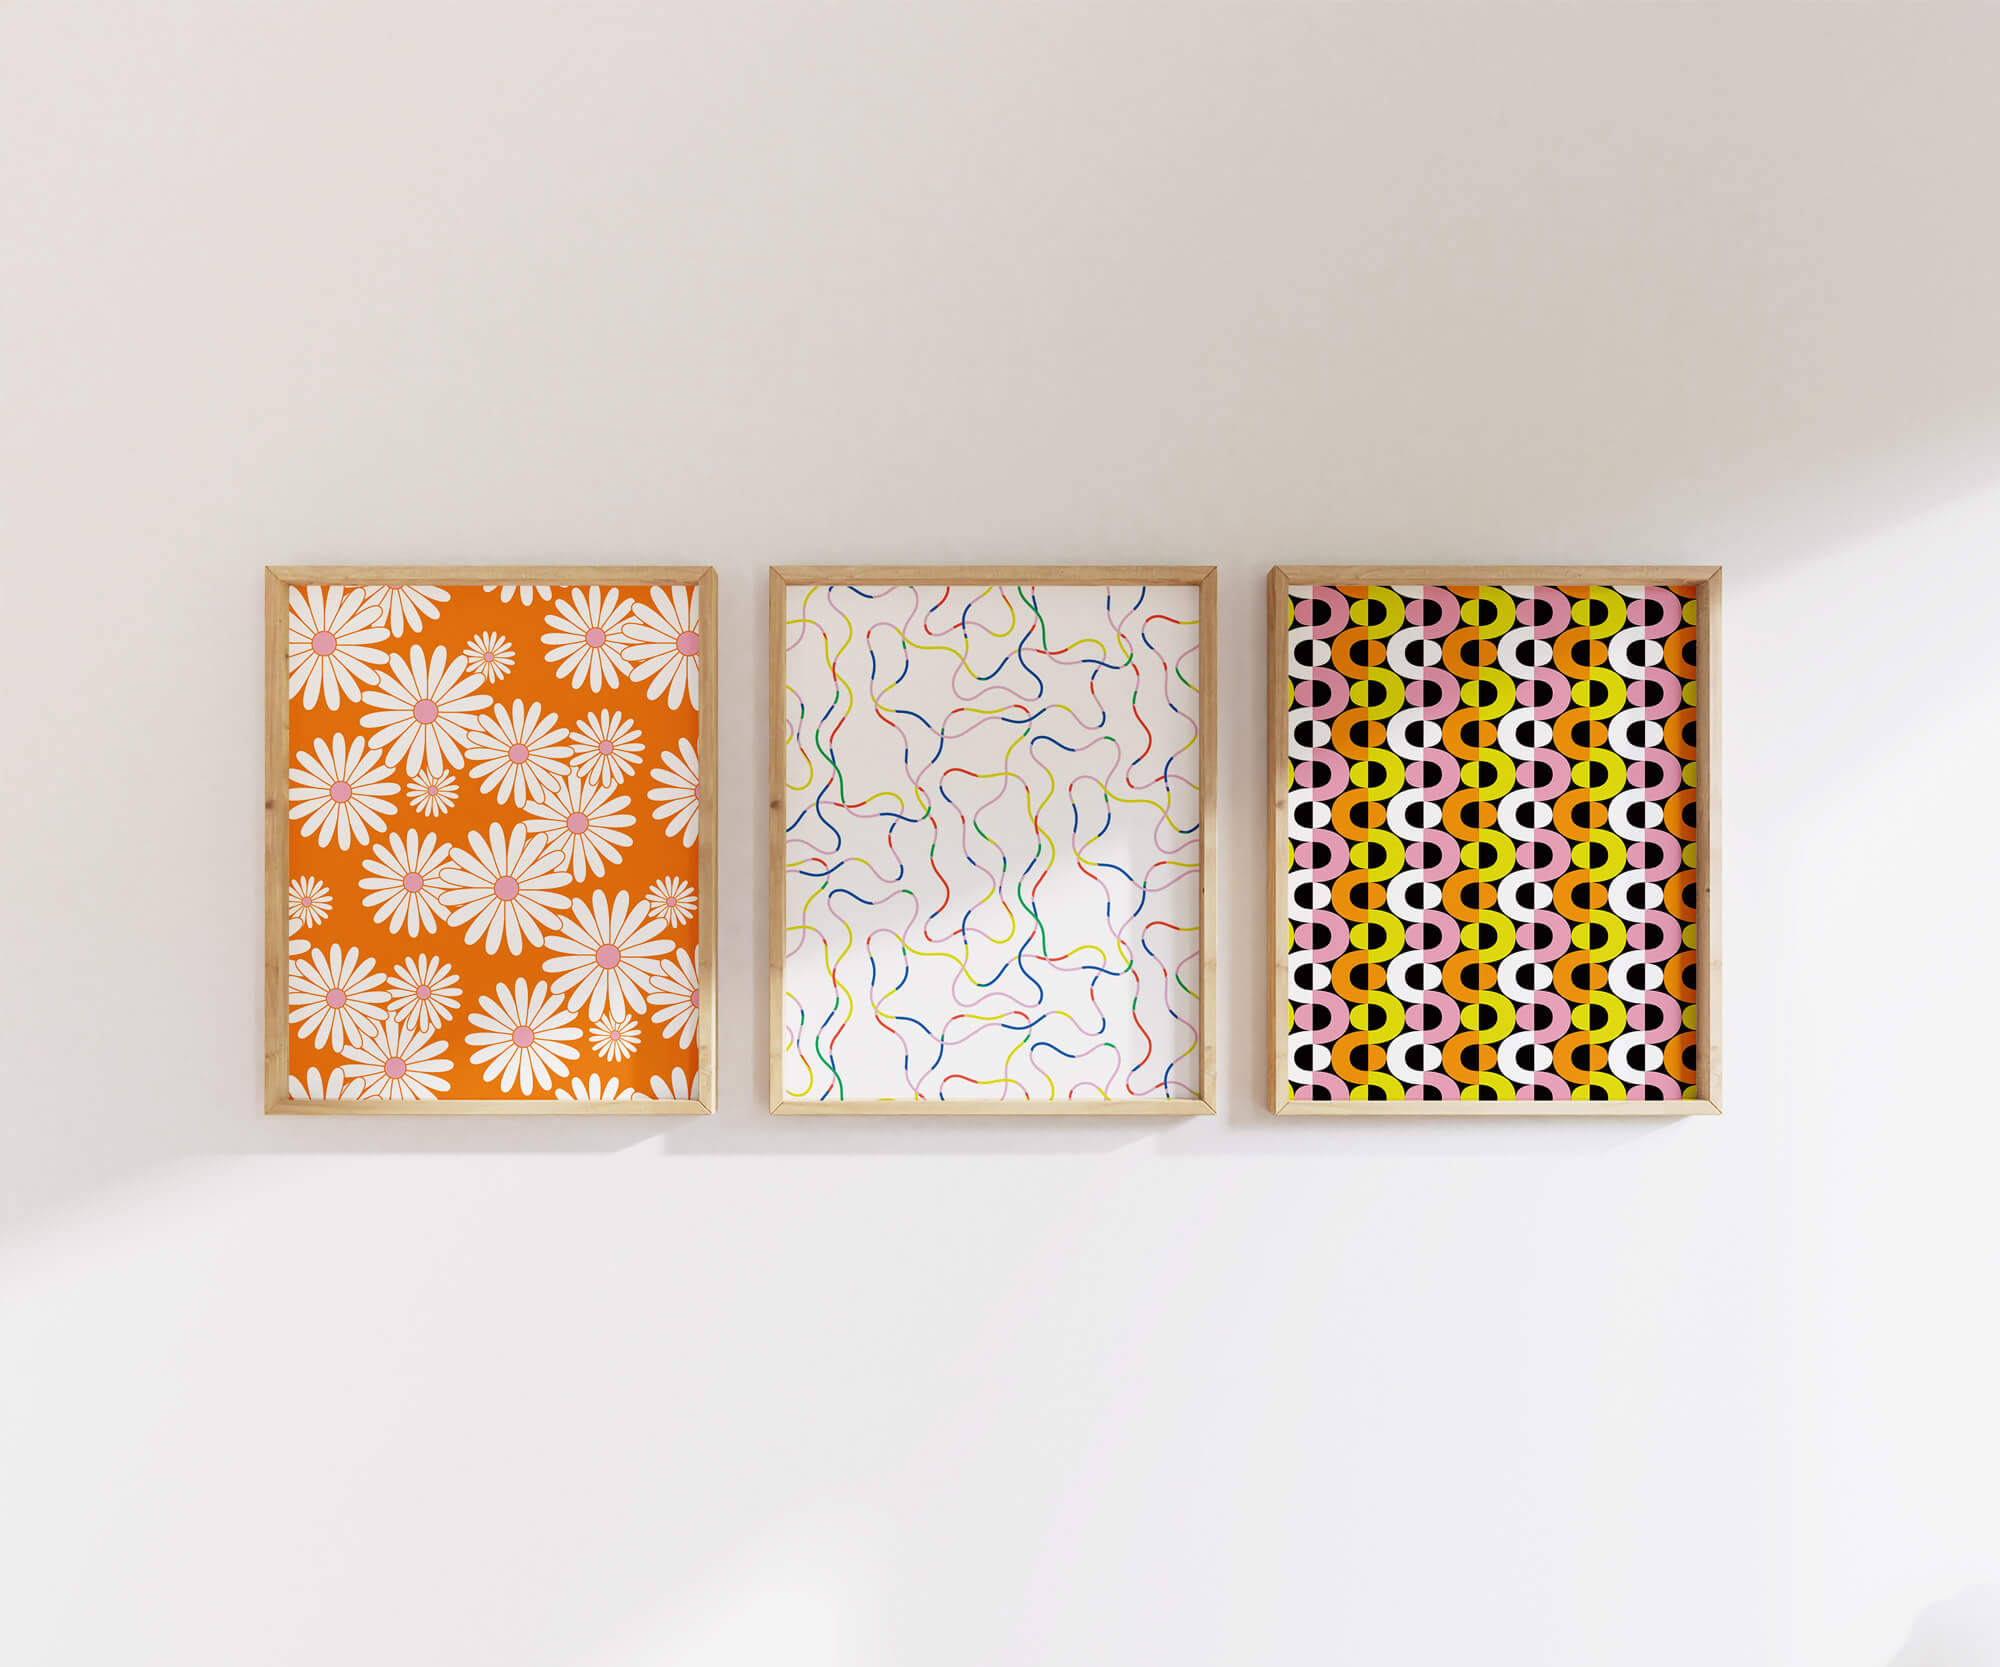 Gallery wall of colorful, modern daisies, graphic florals, squiggles, geometric, and abstract archival giclée art prints. Made in USA by My Darlin' @mydarlin_bk